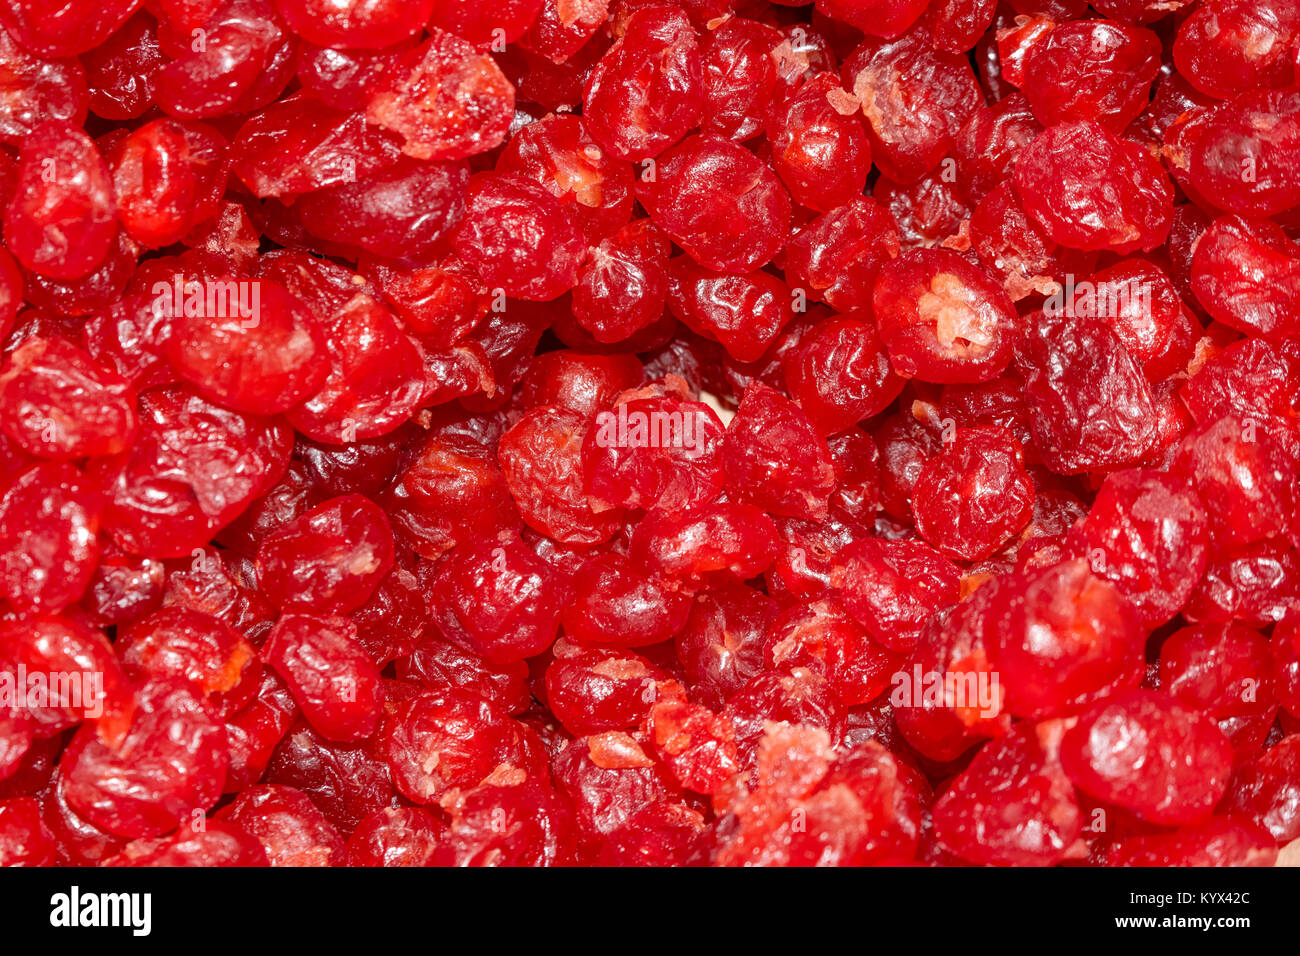 dried cranberrie fruit on a pile on a food market, coloful dried fruits, dried fruits Stock Photo